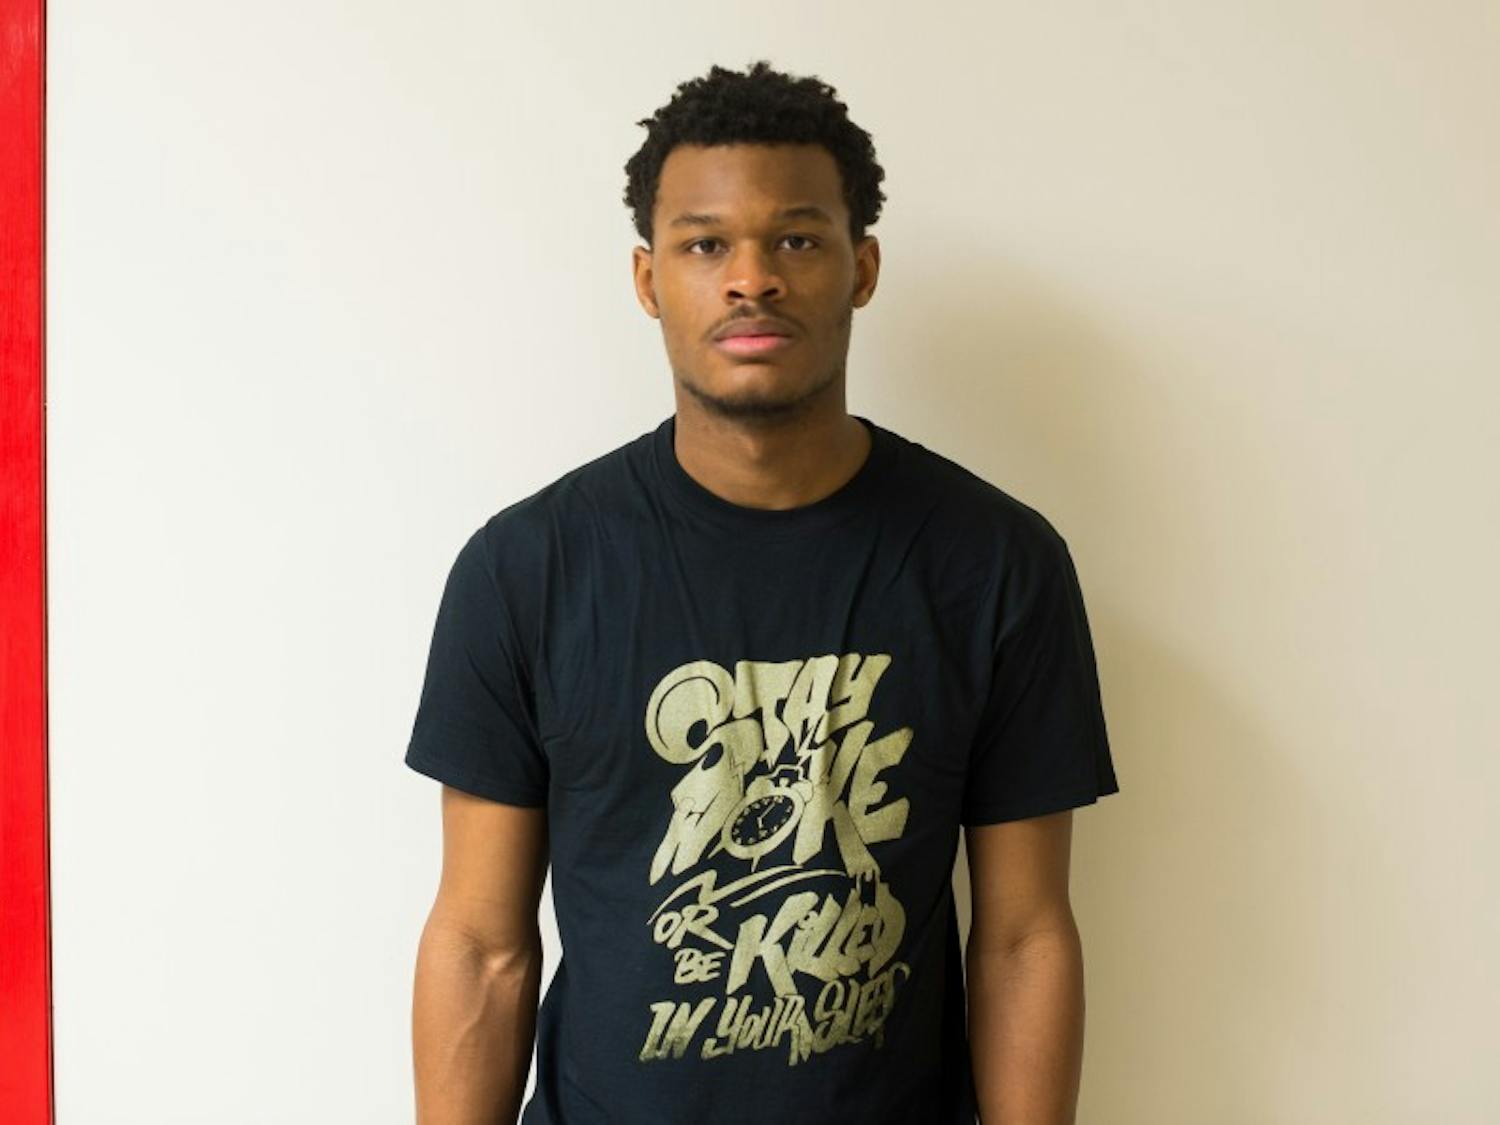 UW-Madison sophomore Eneale Pickett strives to spark conversations through his apparel, which he models above, from his line “Resistance: Gold Edition.”